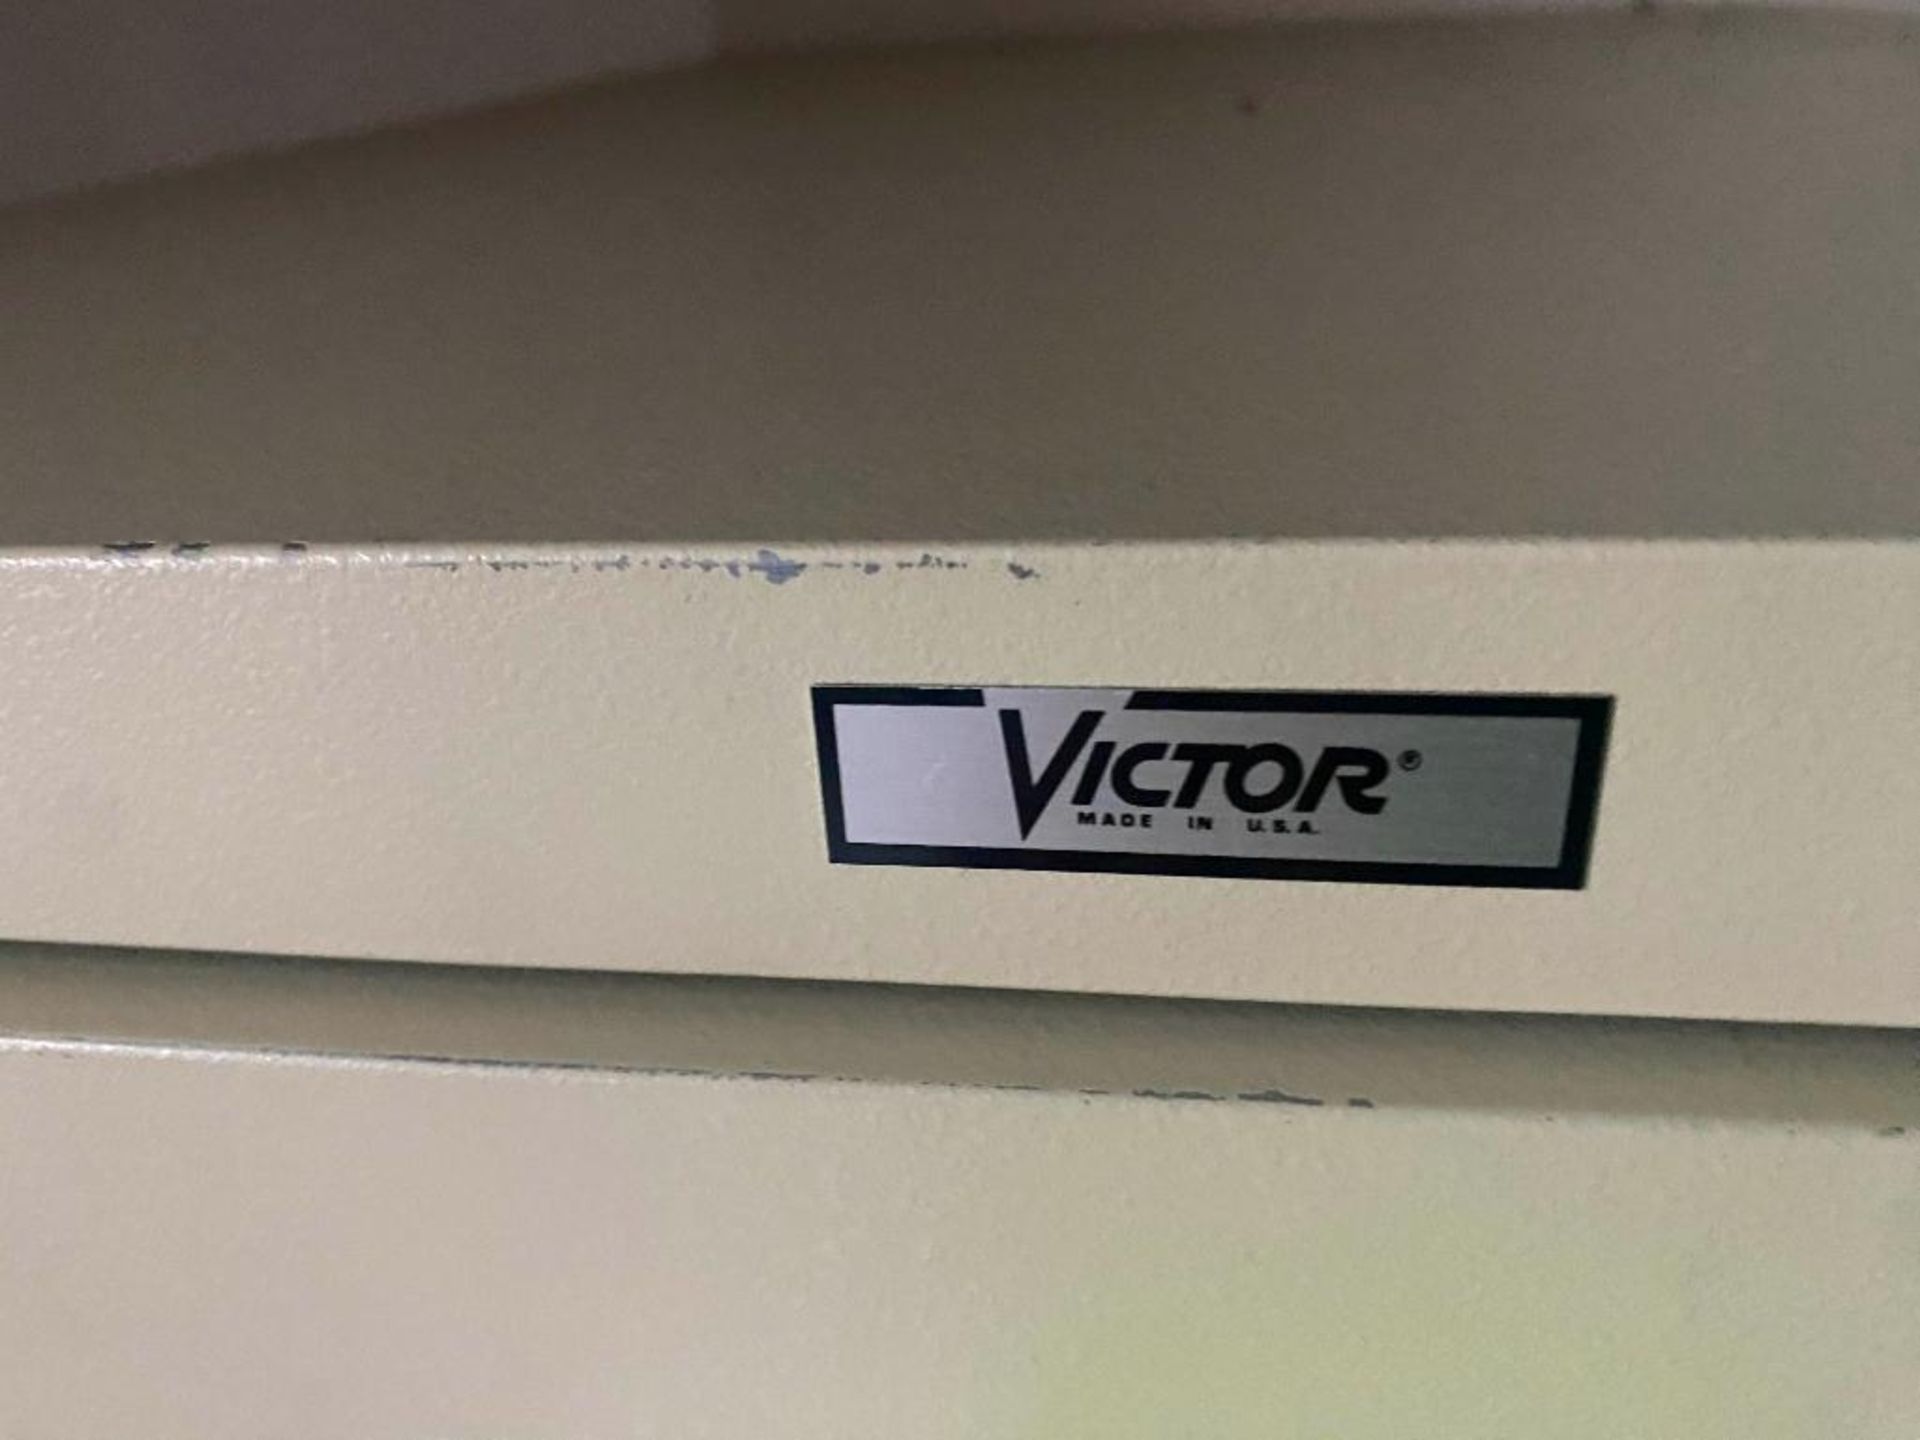 Victor fireproof filing cabinet. - Image 4 of 5